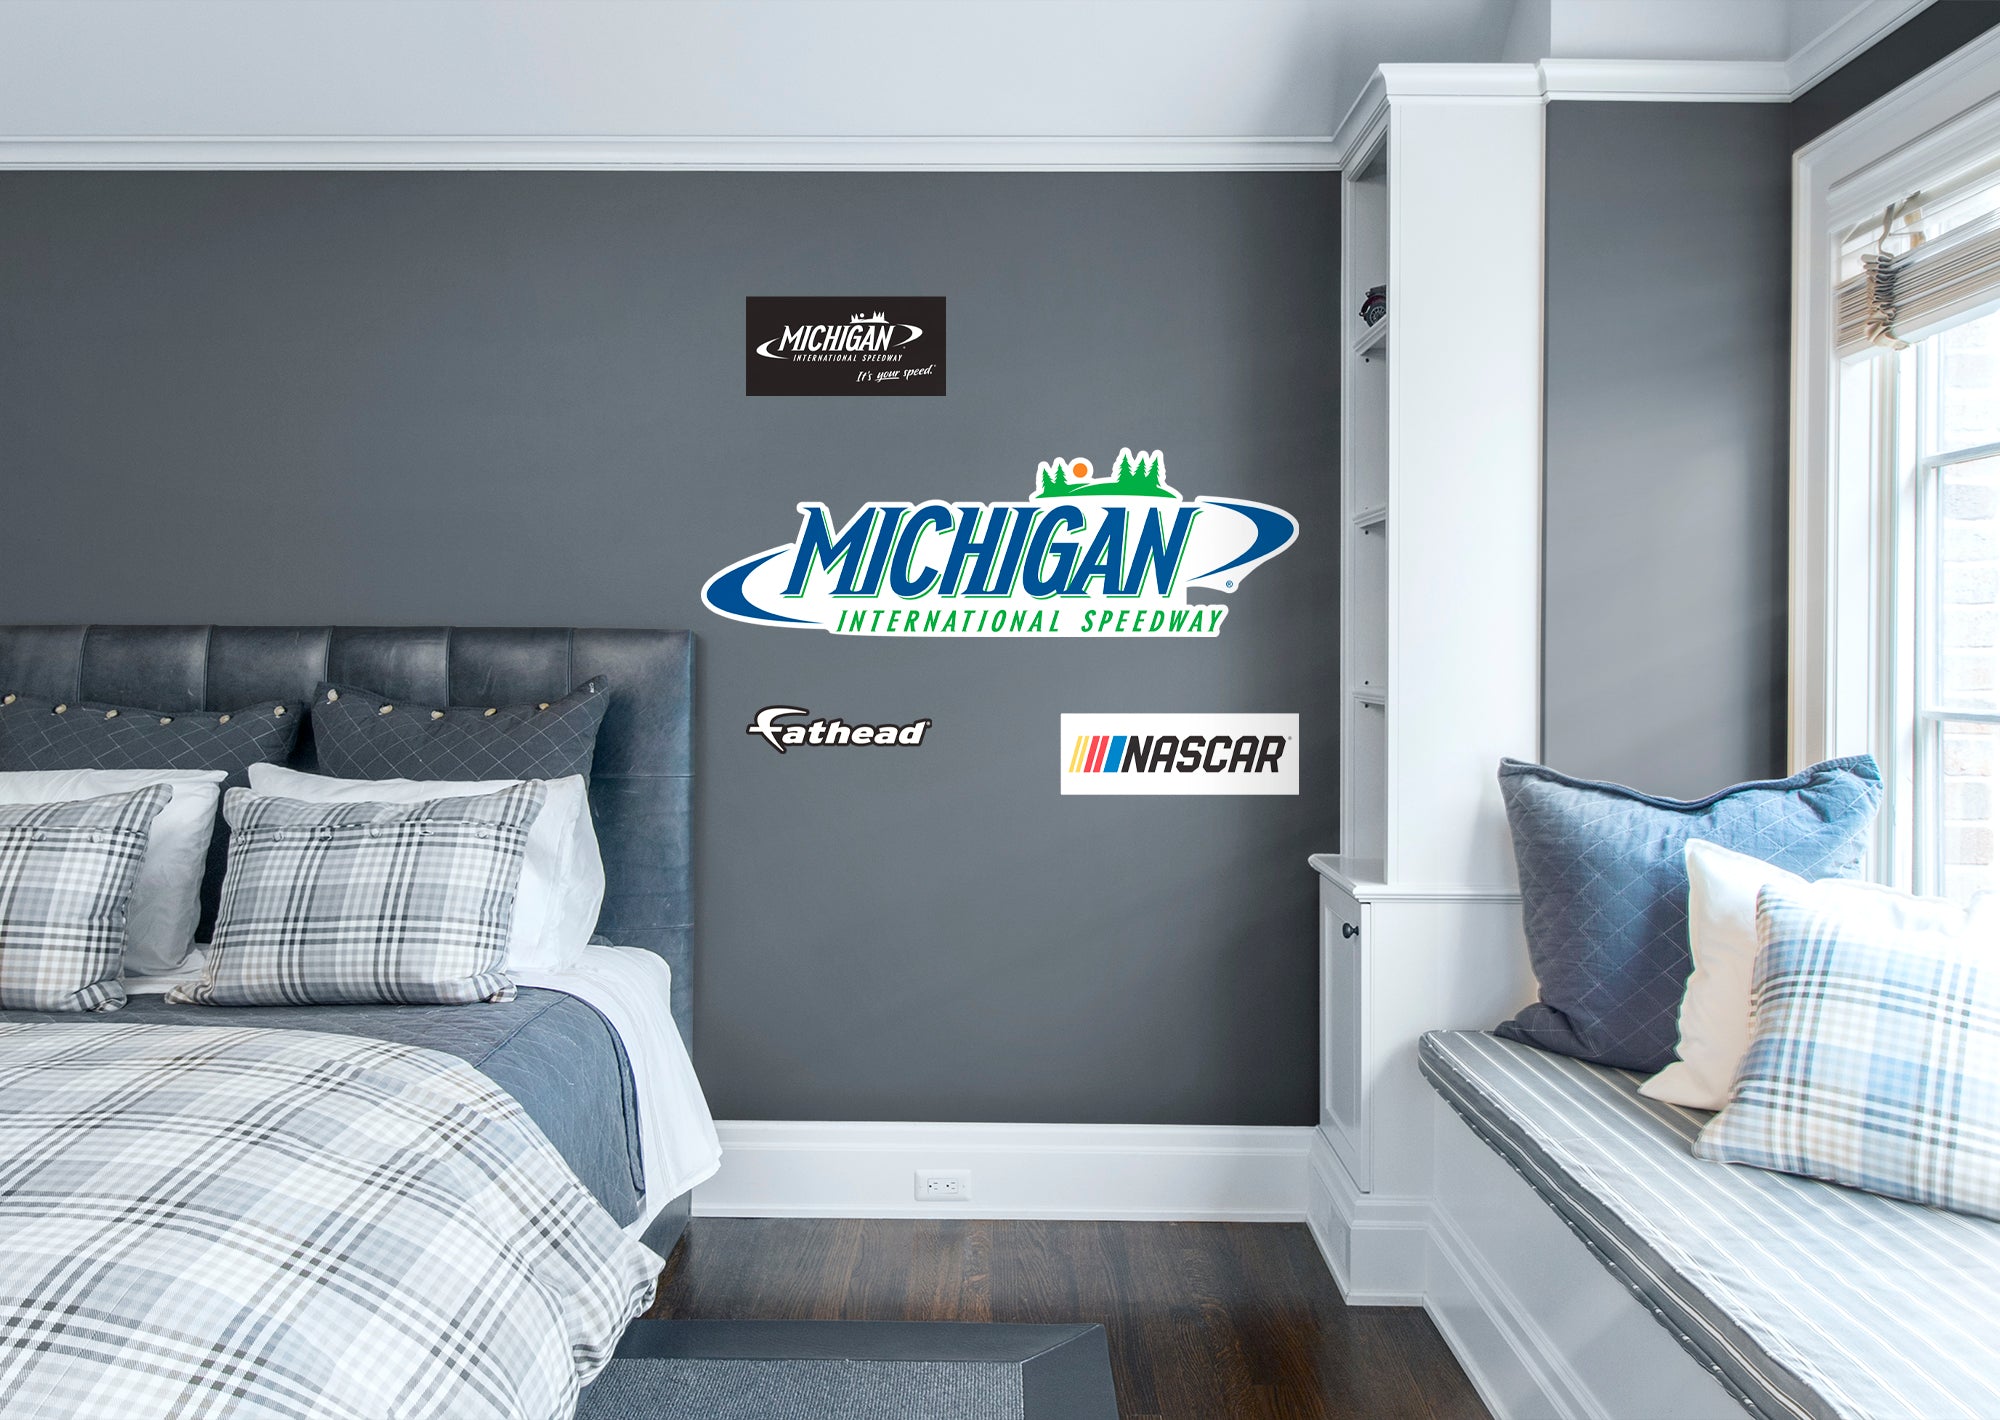 Michigan International Speedway 2021 Logo - Officially Licensed NASCAR Removable Wall Decal Giant Logo + 3 Decals (51"W x16"H) b